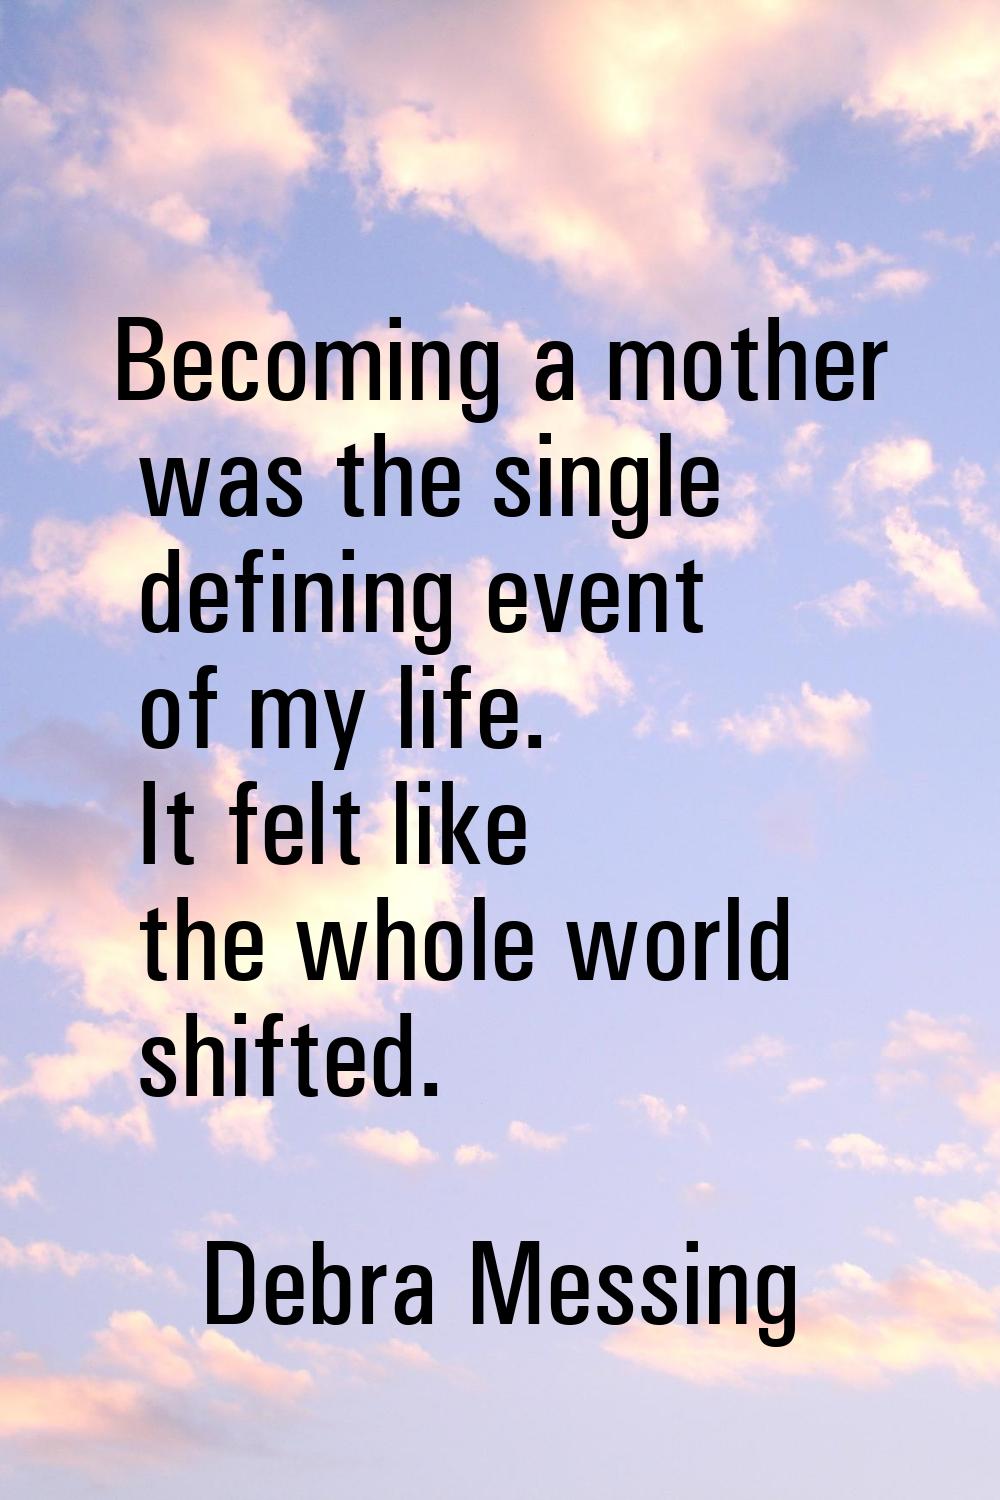 Becoming a mother was the single defining event of my life. It felt like the whole world shifted.